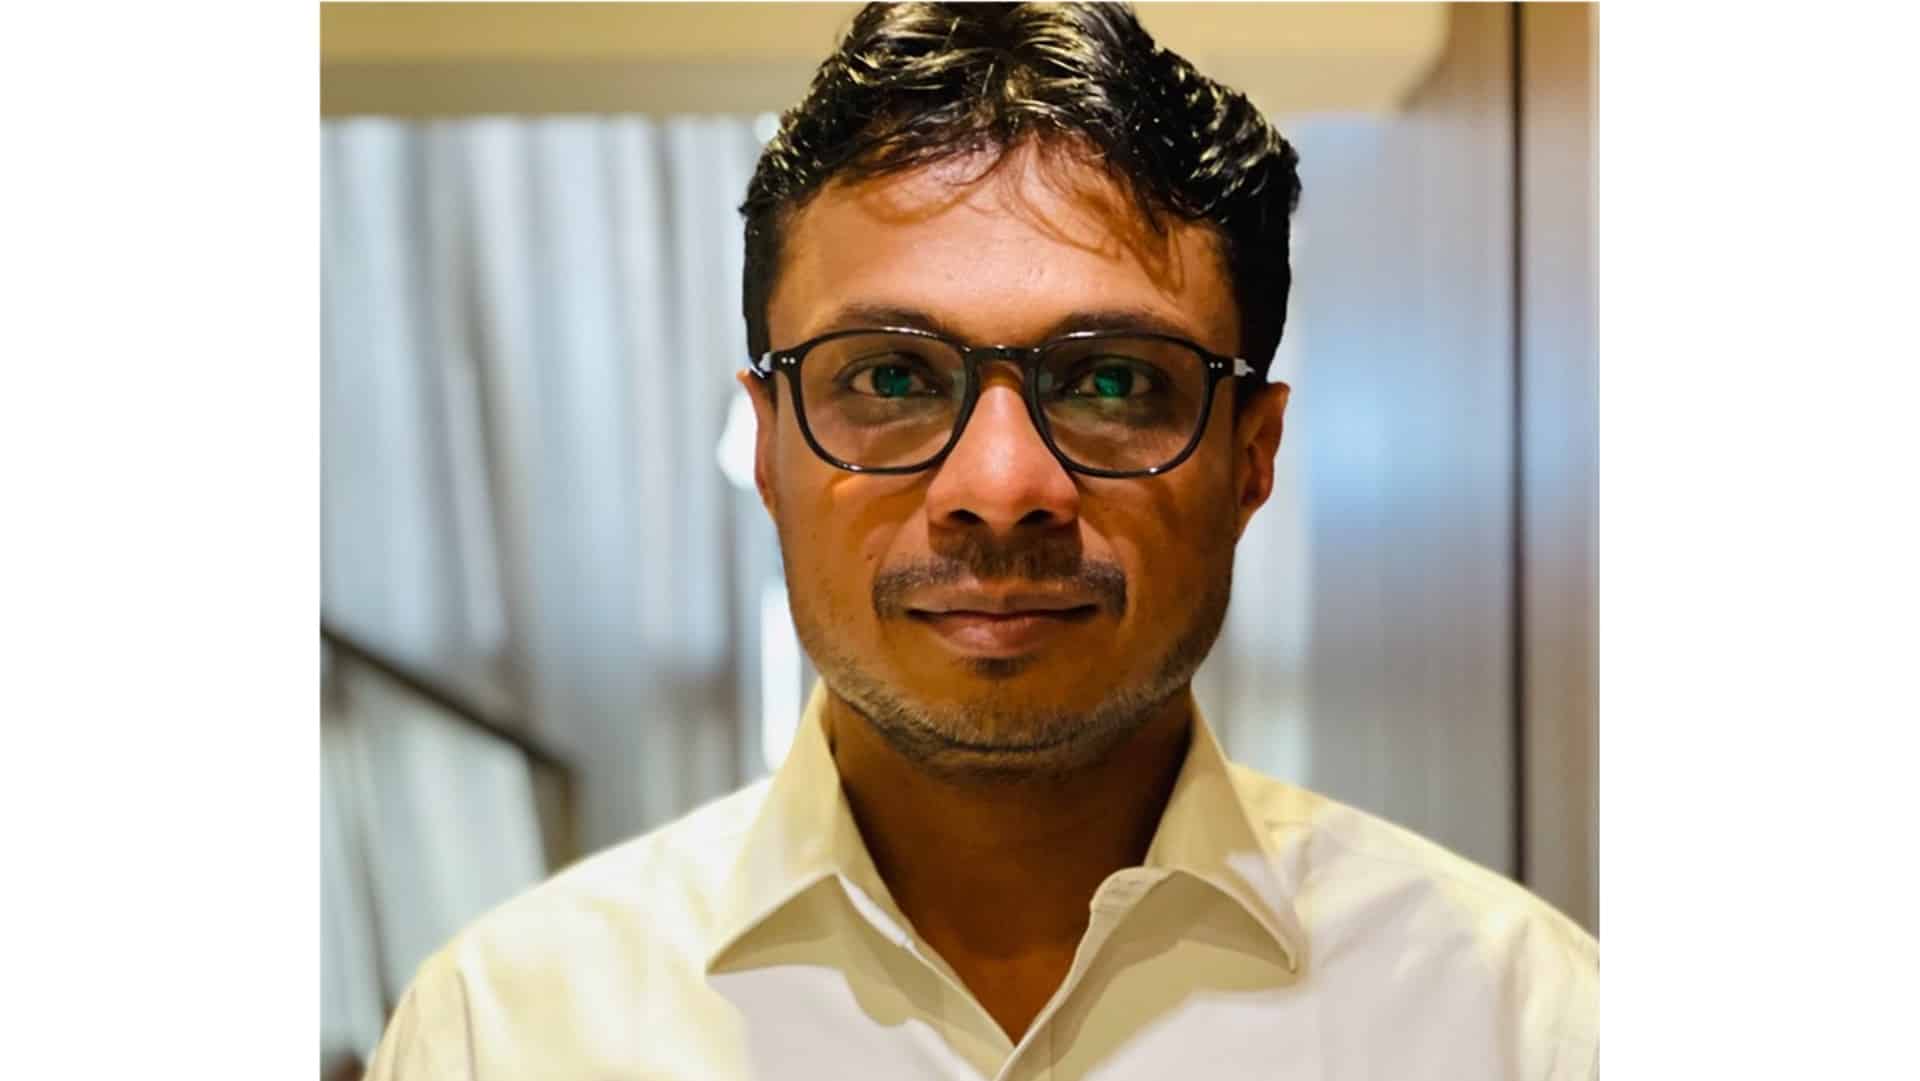 Financial services present large opportunity: Sachin Bansal